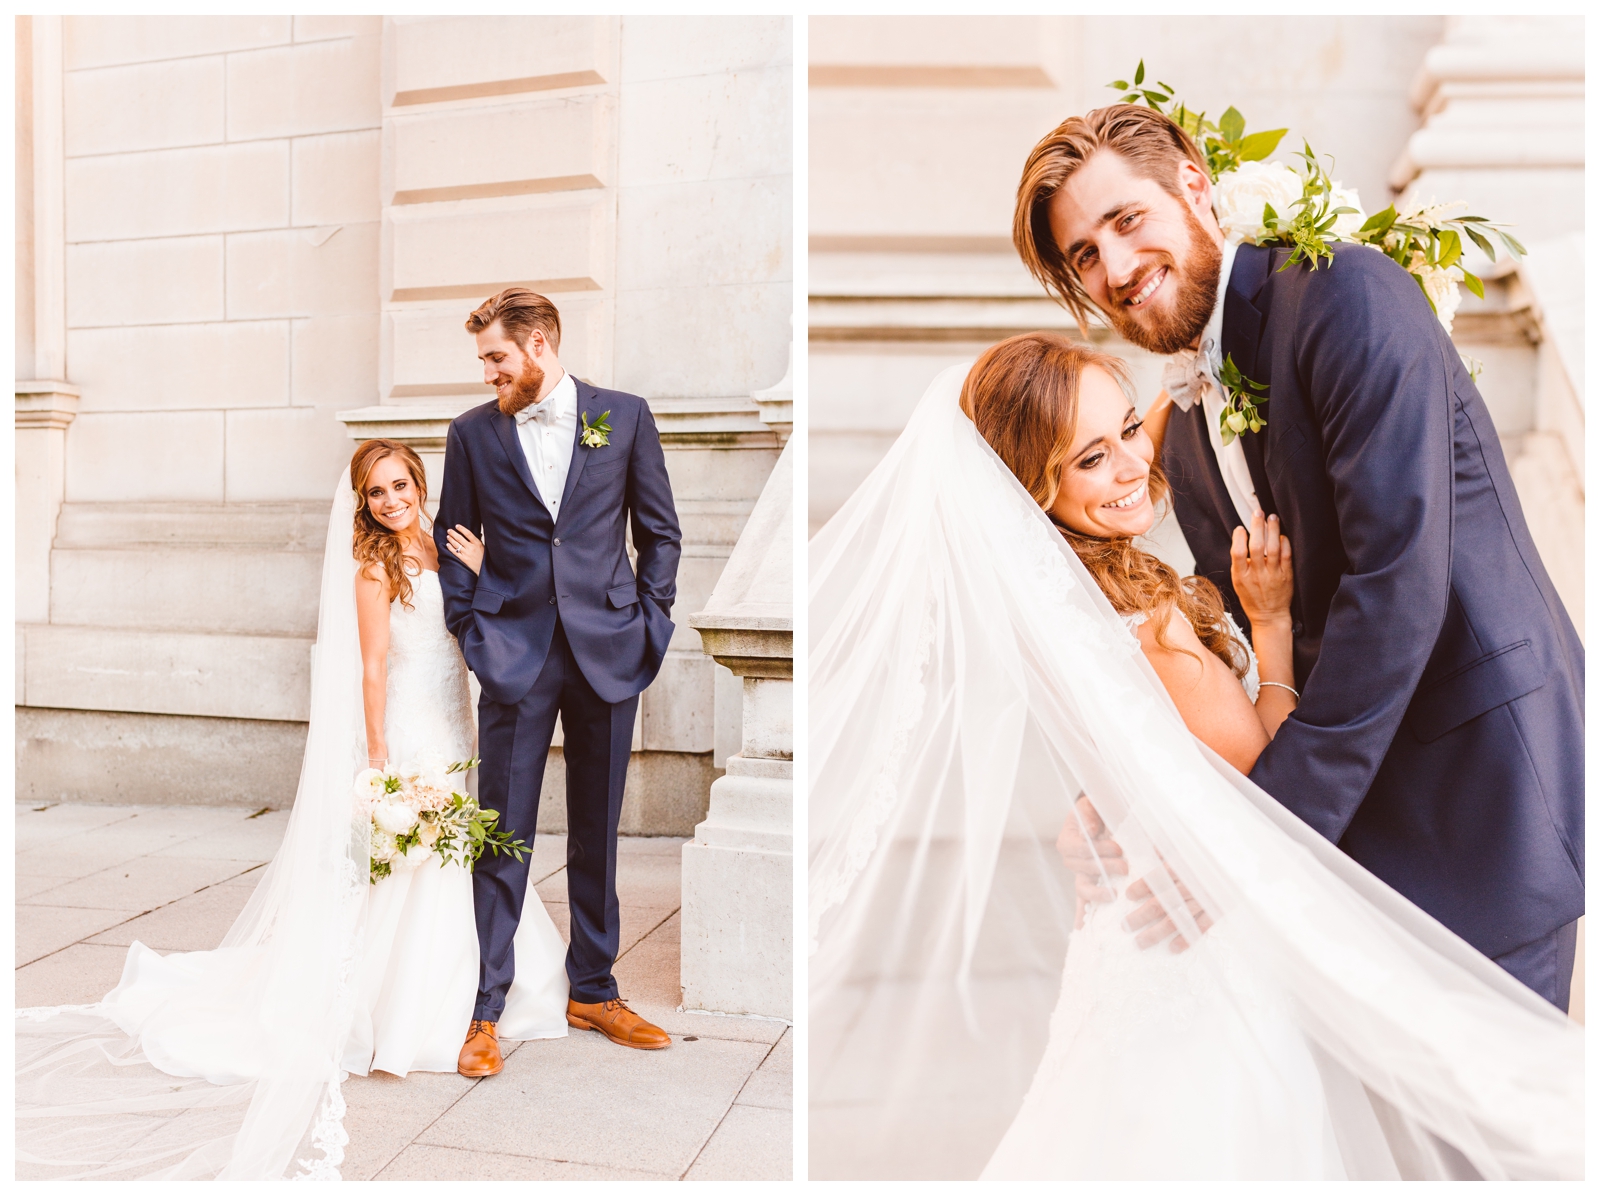 Romantic George Peabody Library Wedding Inspiration - Baltimore, MD - Brooke Michelle Photography